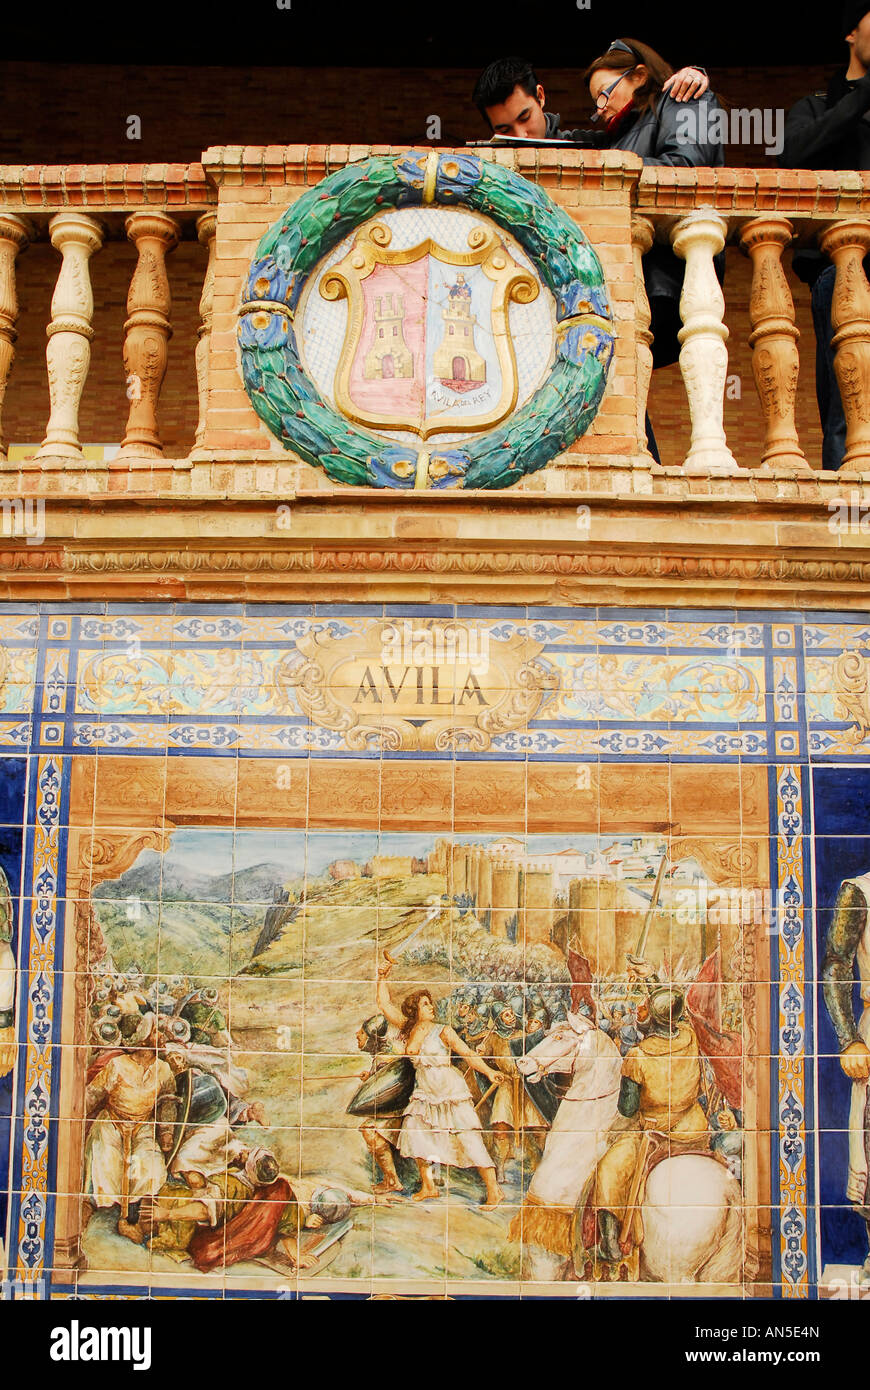 Glazed tile depicting the conquest of Avila in Spain Square or Plaza de España SEVILLE Seville province Andalusia region Spain Stock Photo